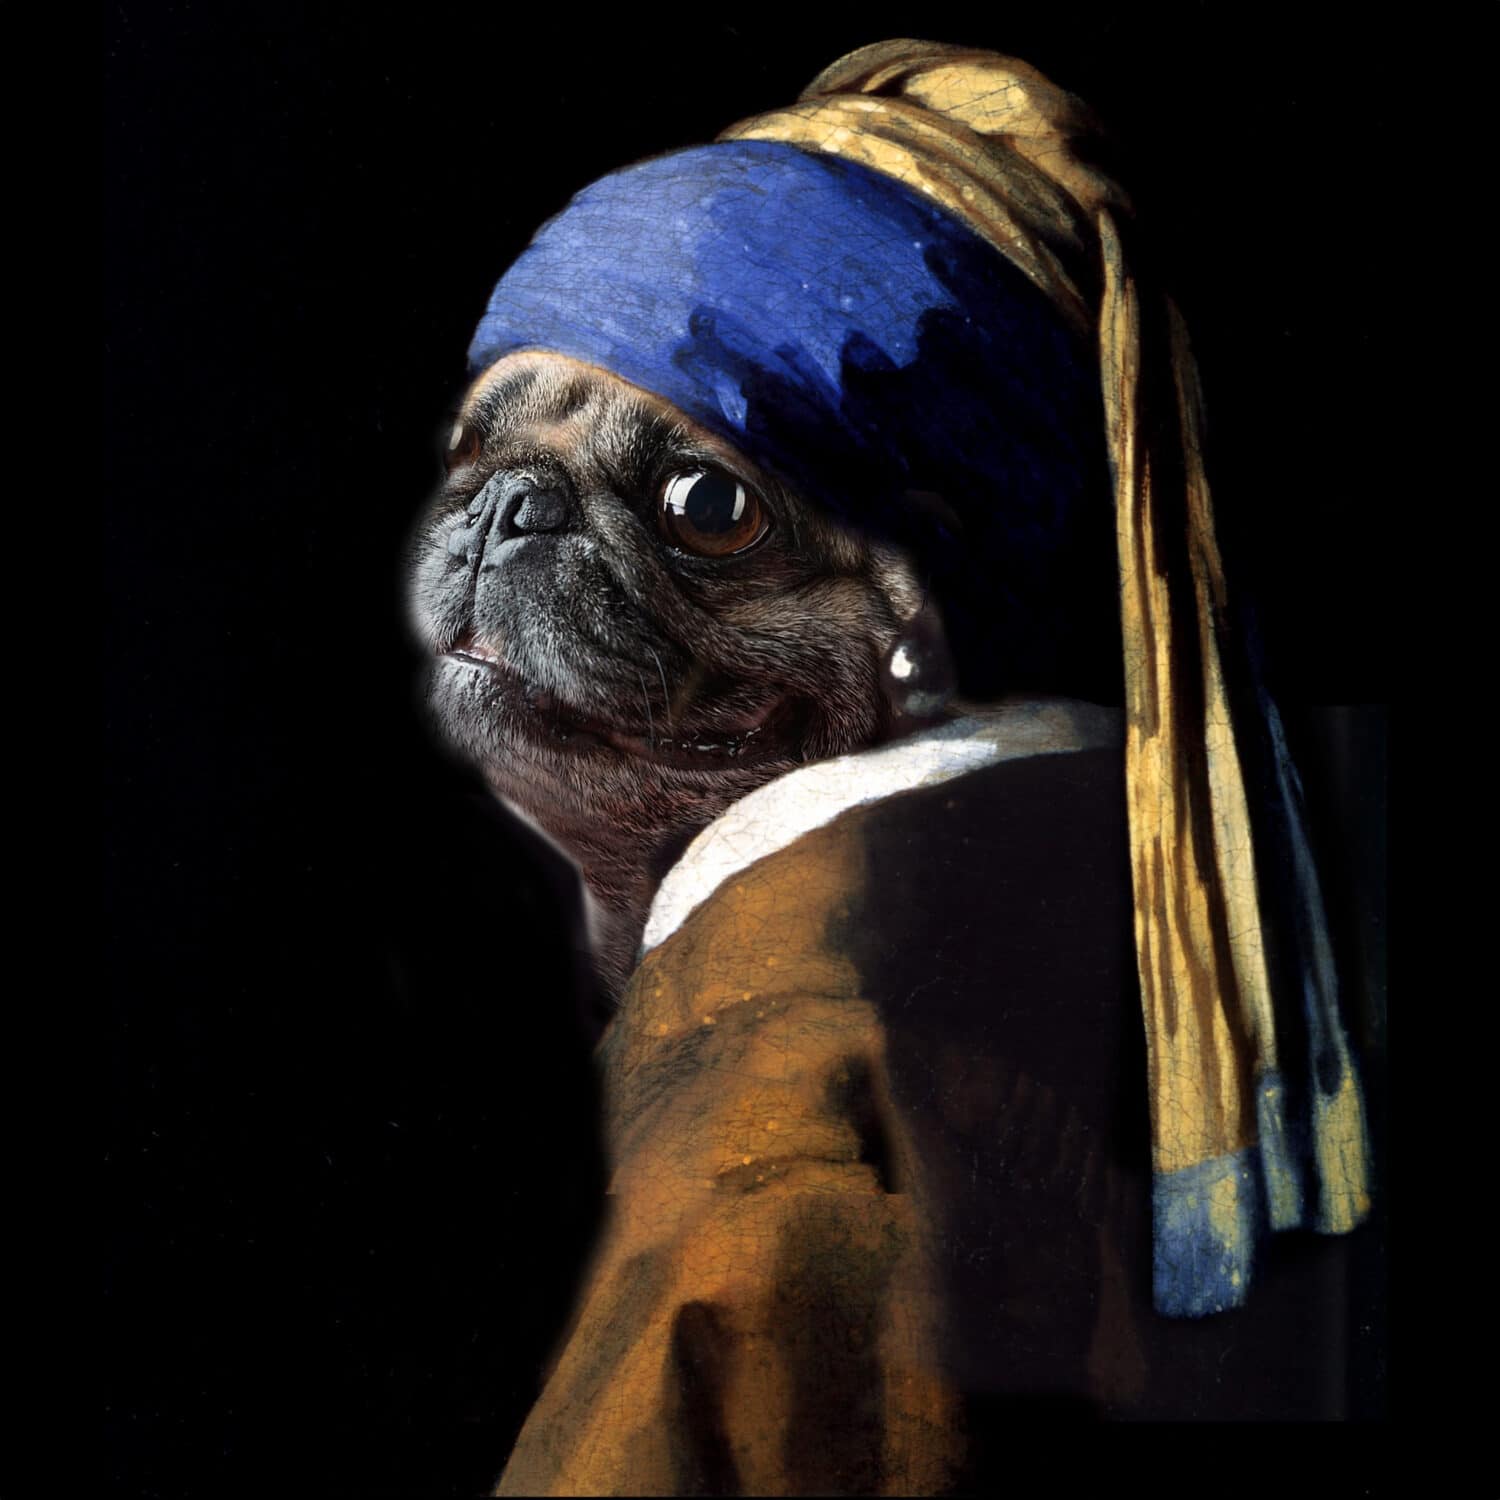 Vermeer spoof  of "Girl with a Pearl Earring" now, "Pug with a Pearl Earring" using my daughter's pug dog photo morphed into the correct position for a similar portrait.